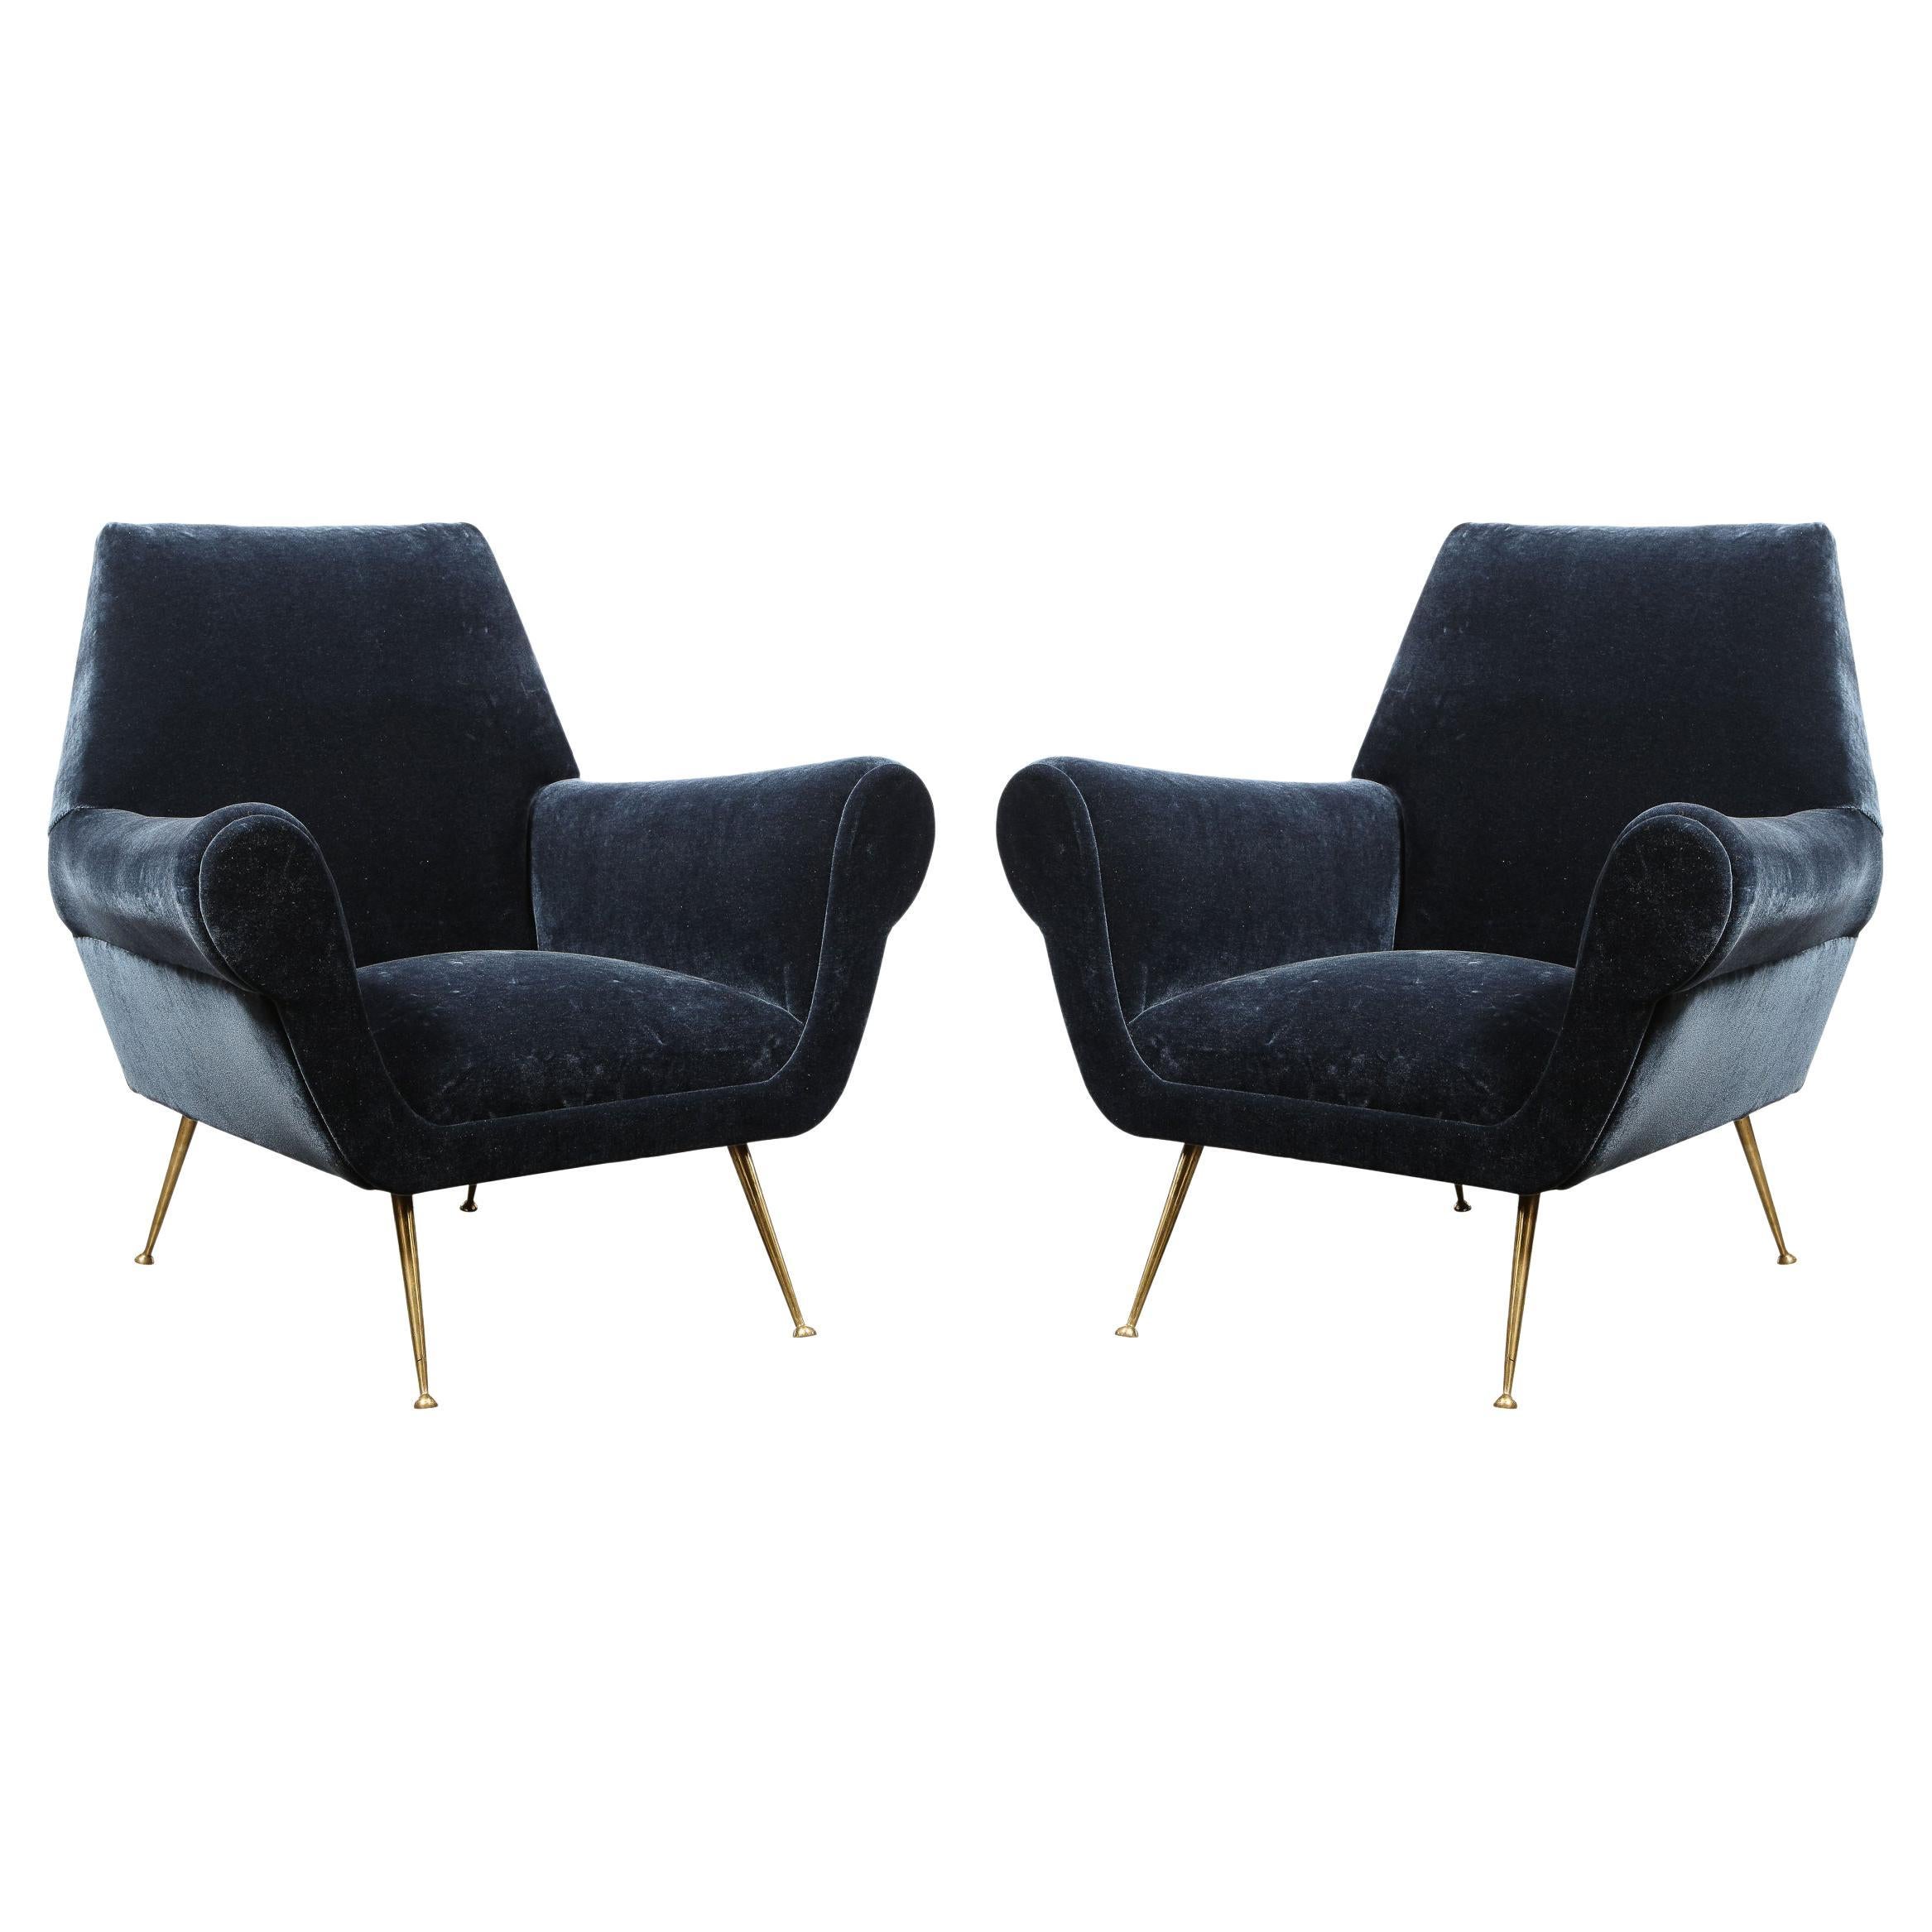 Pair of Mid-Century Modern Marco Zanuso Lounge Chairs with Sculptural Brass Legs